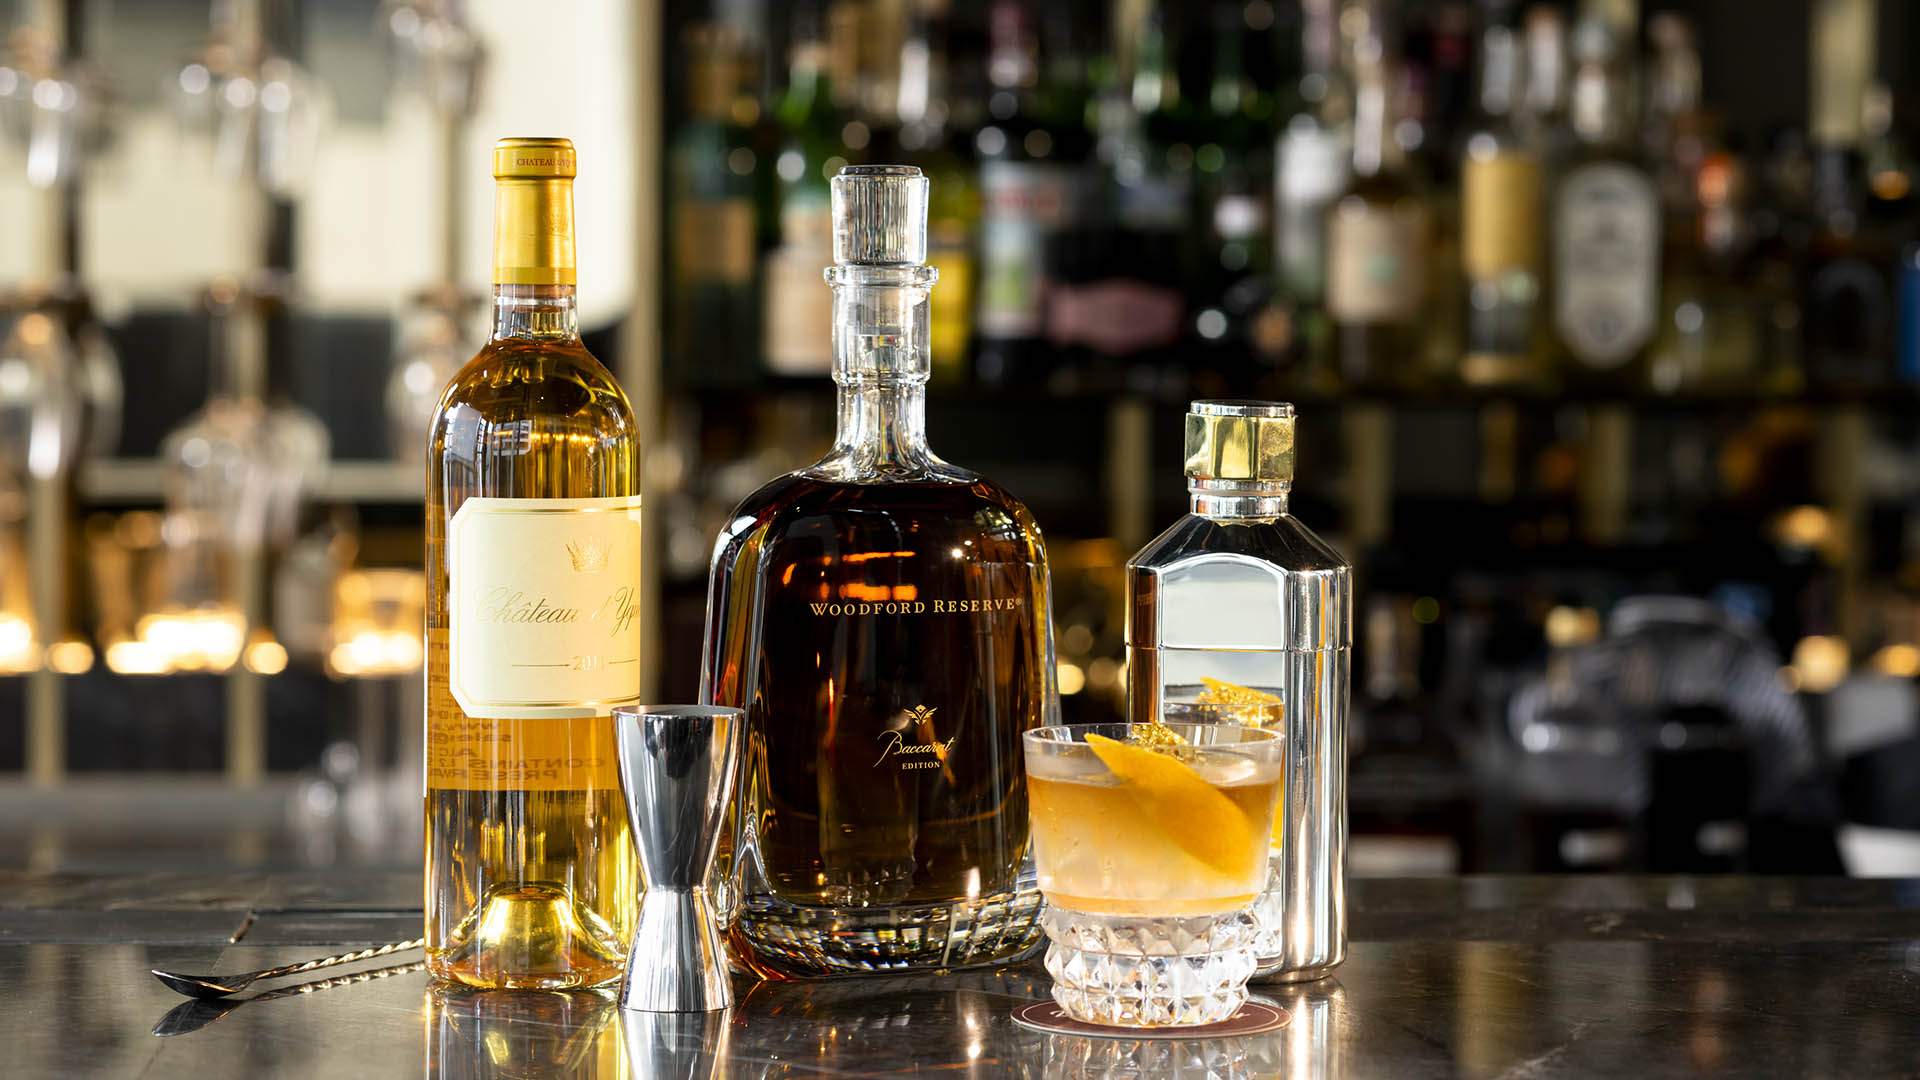 Two Aussie Bars Are Doing $15,000 Gold-Infused Old Fashioneds If You're ...